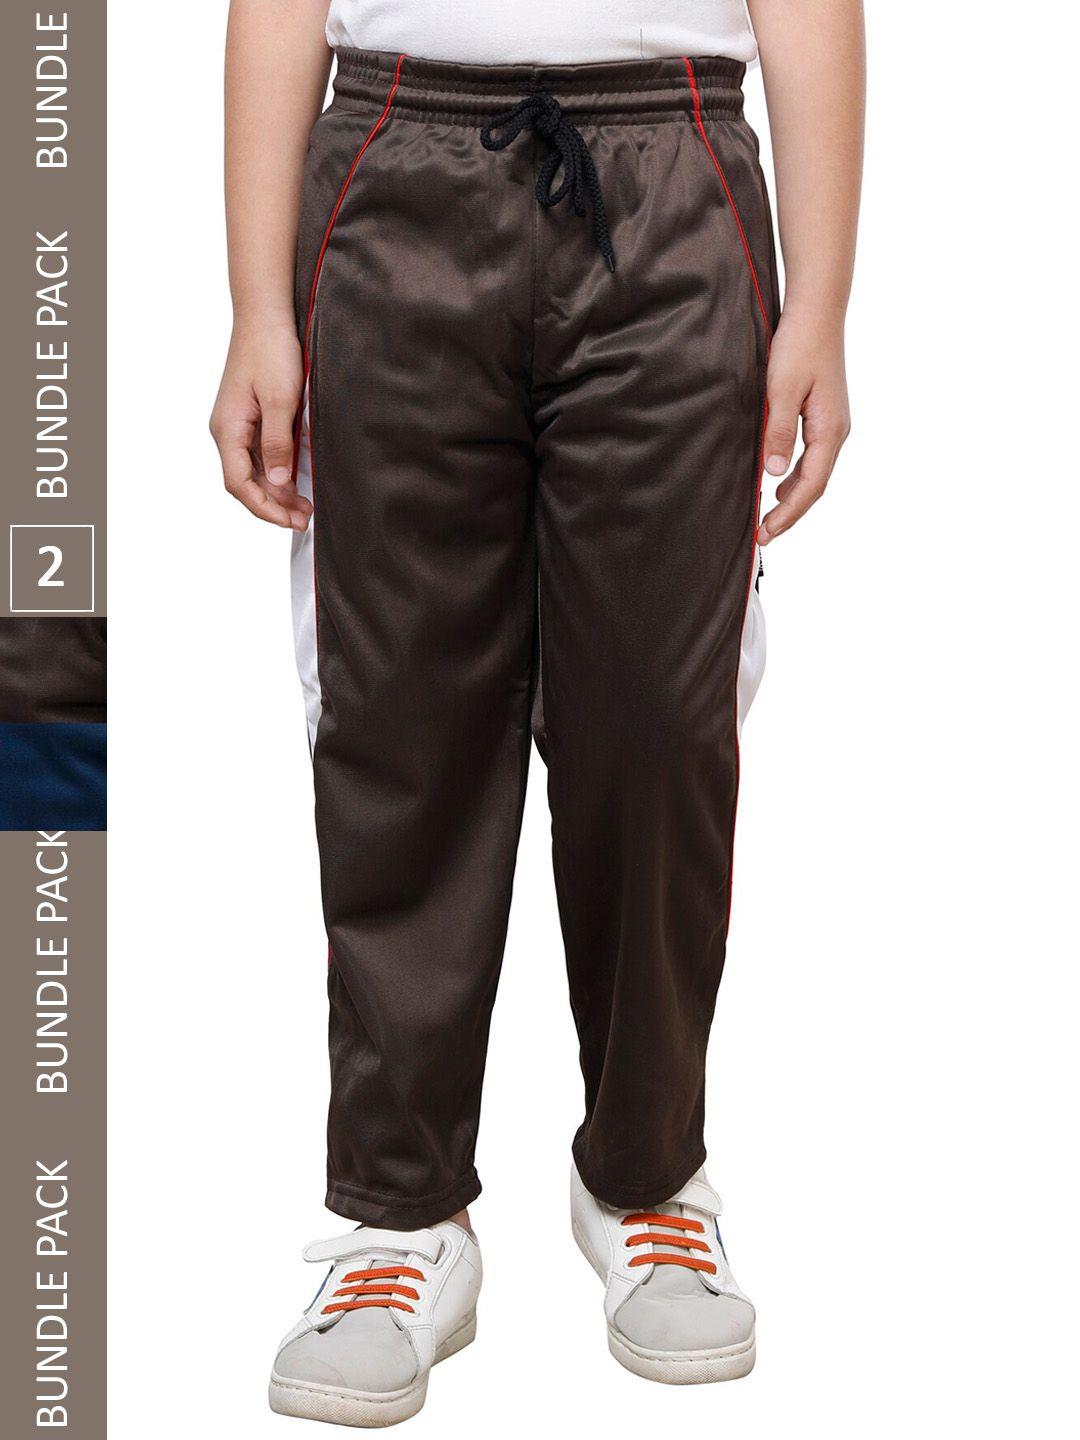 indiweaves-boys-pack-of-2-track-pants